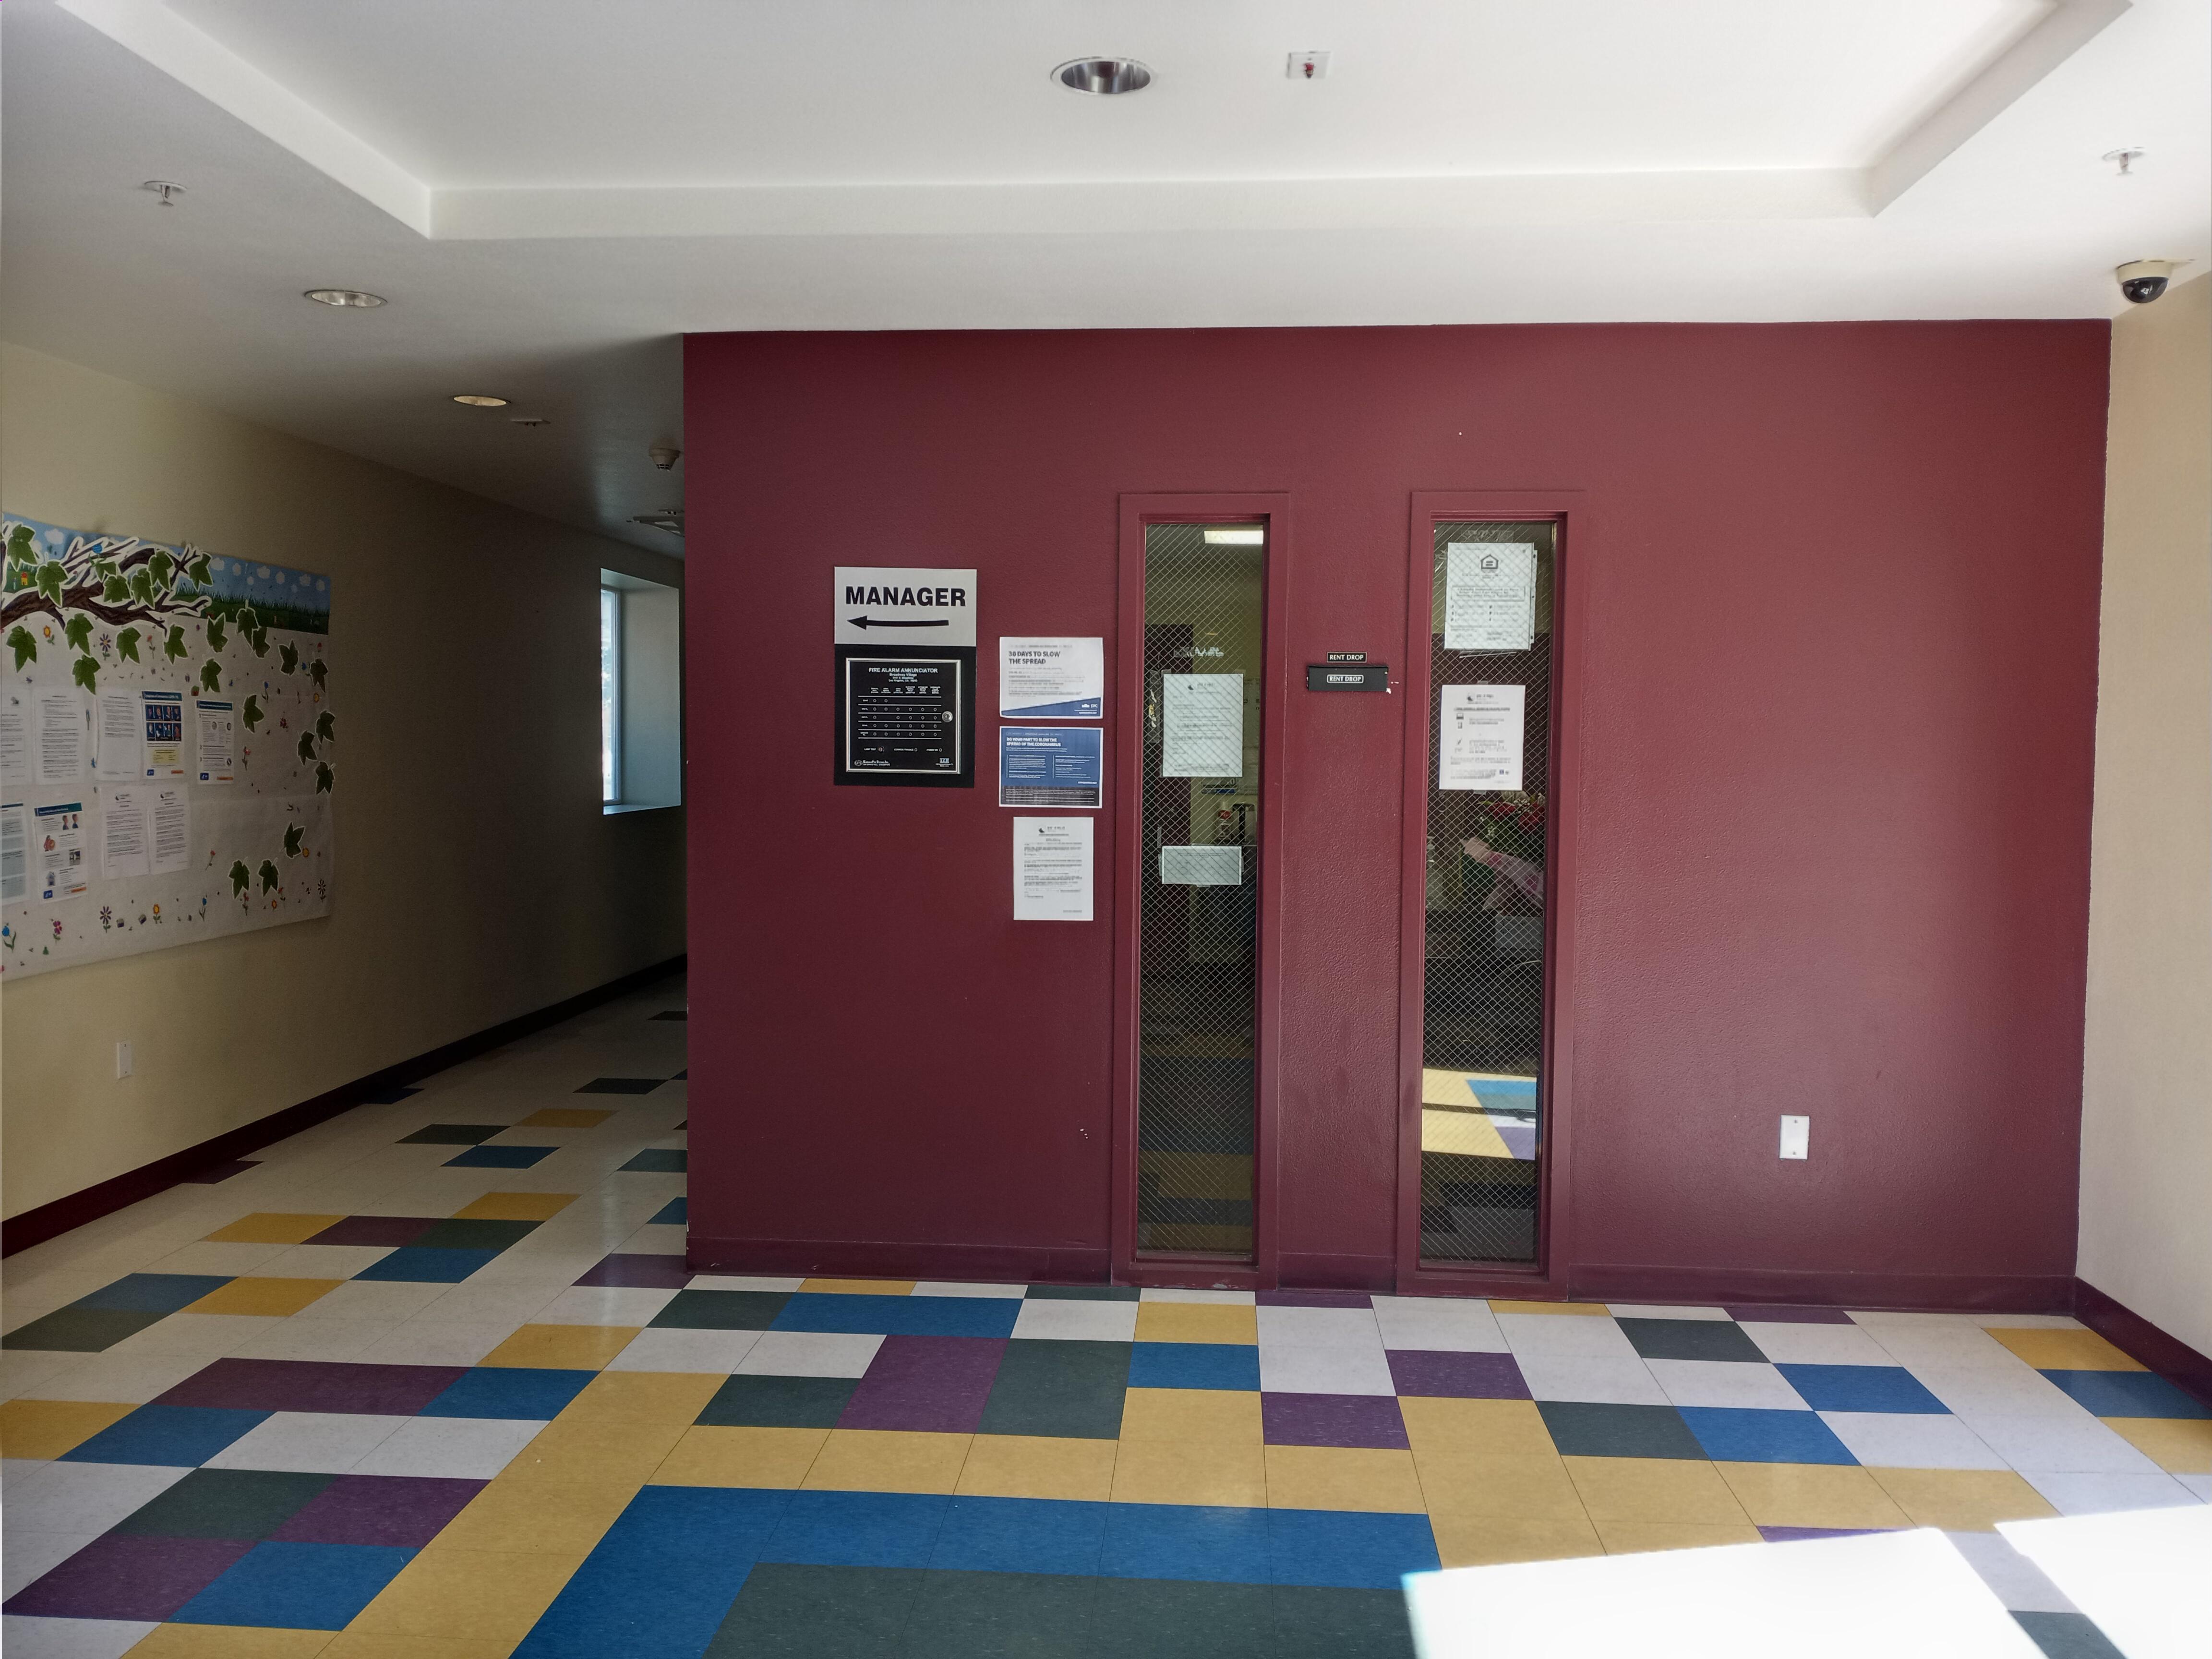 View of manager's office located in the lobby of the building's entrance.